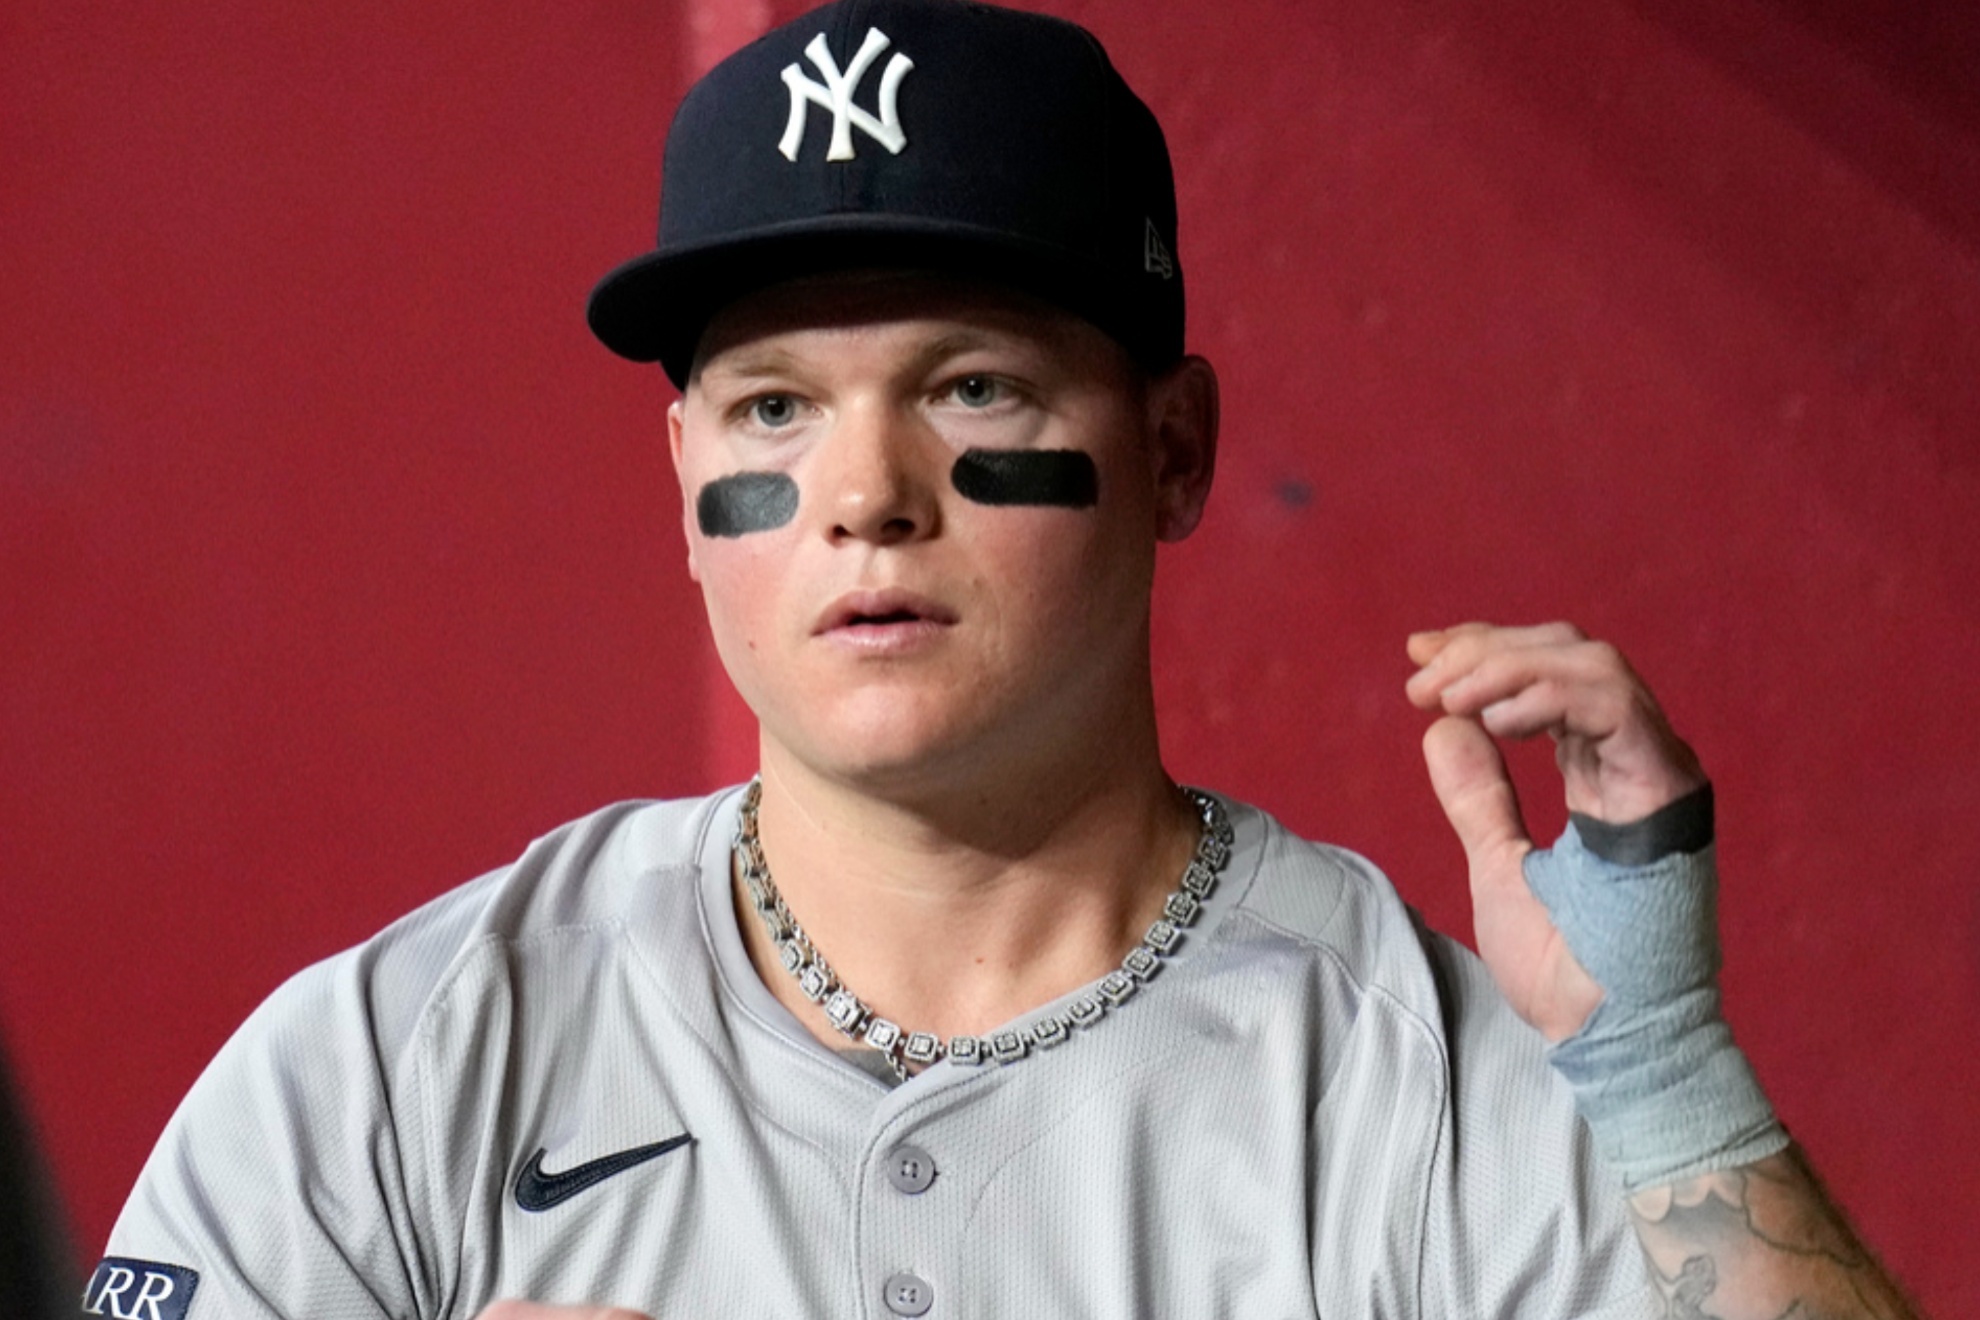 Alex Verdugo scored his first home run as a Yankees player on Wednesday